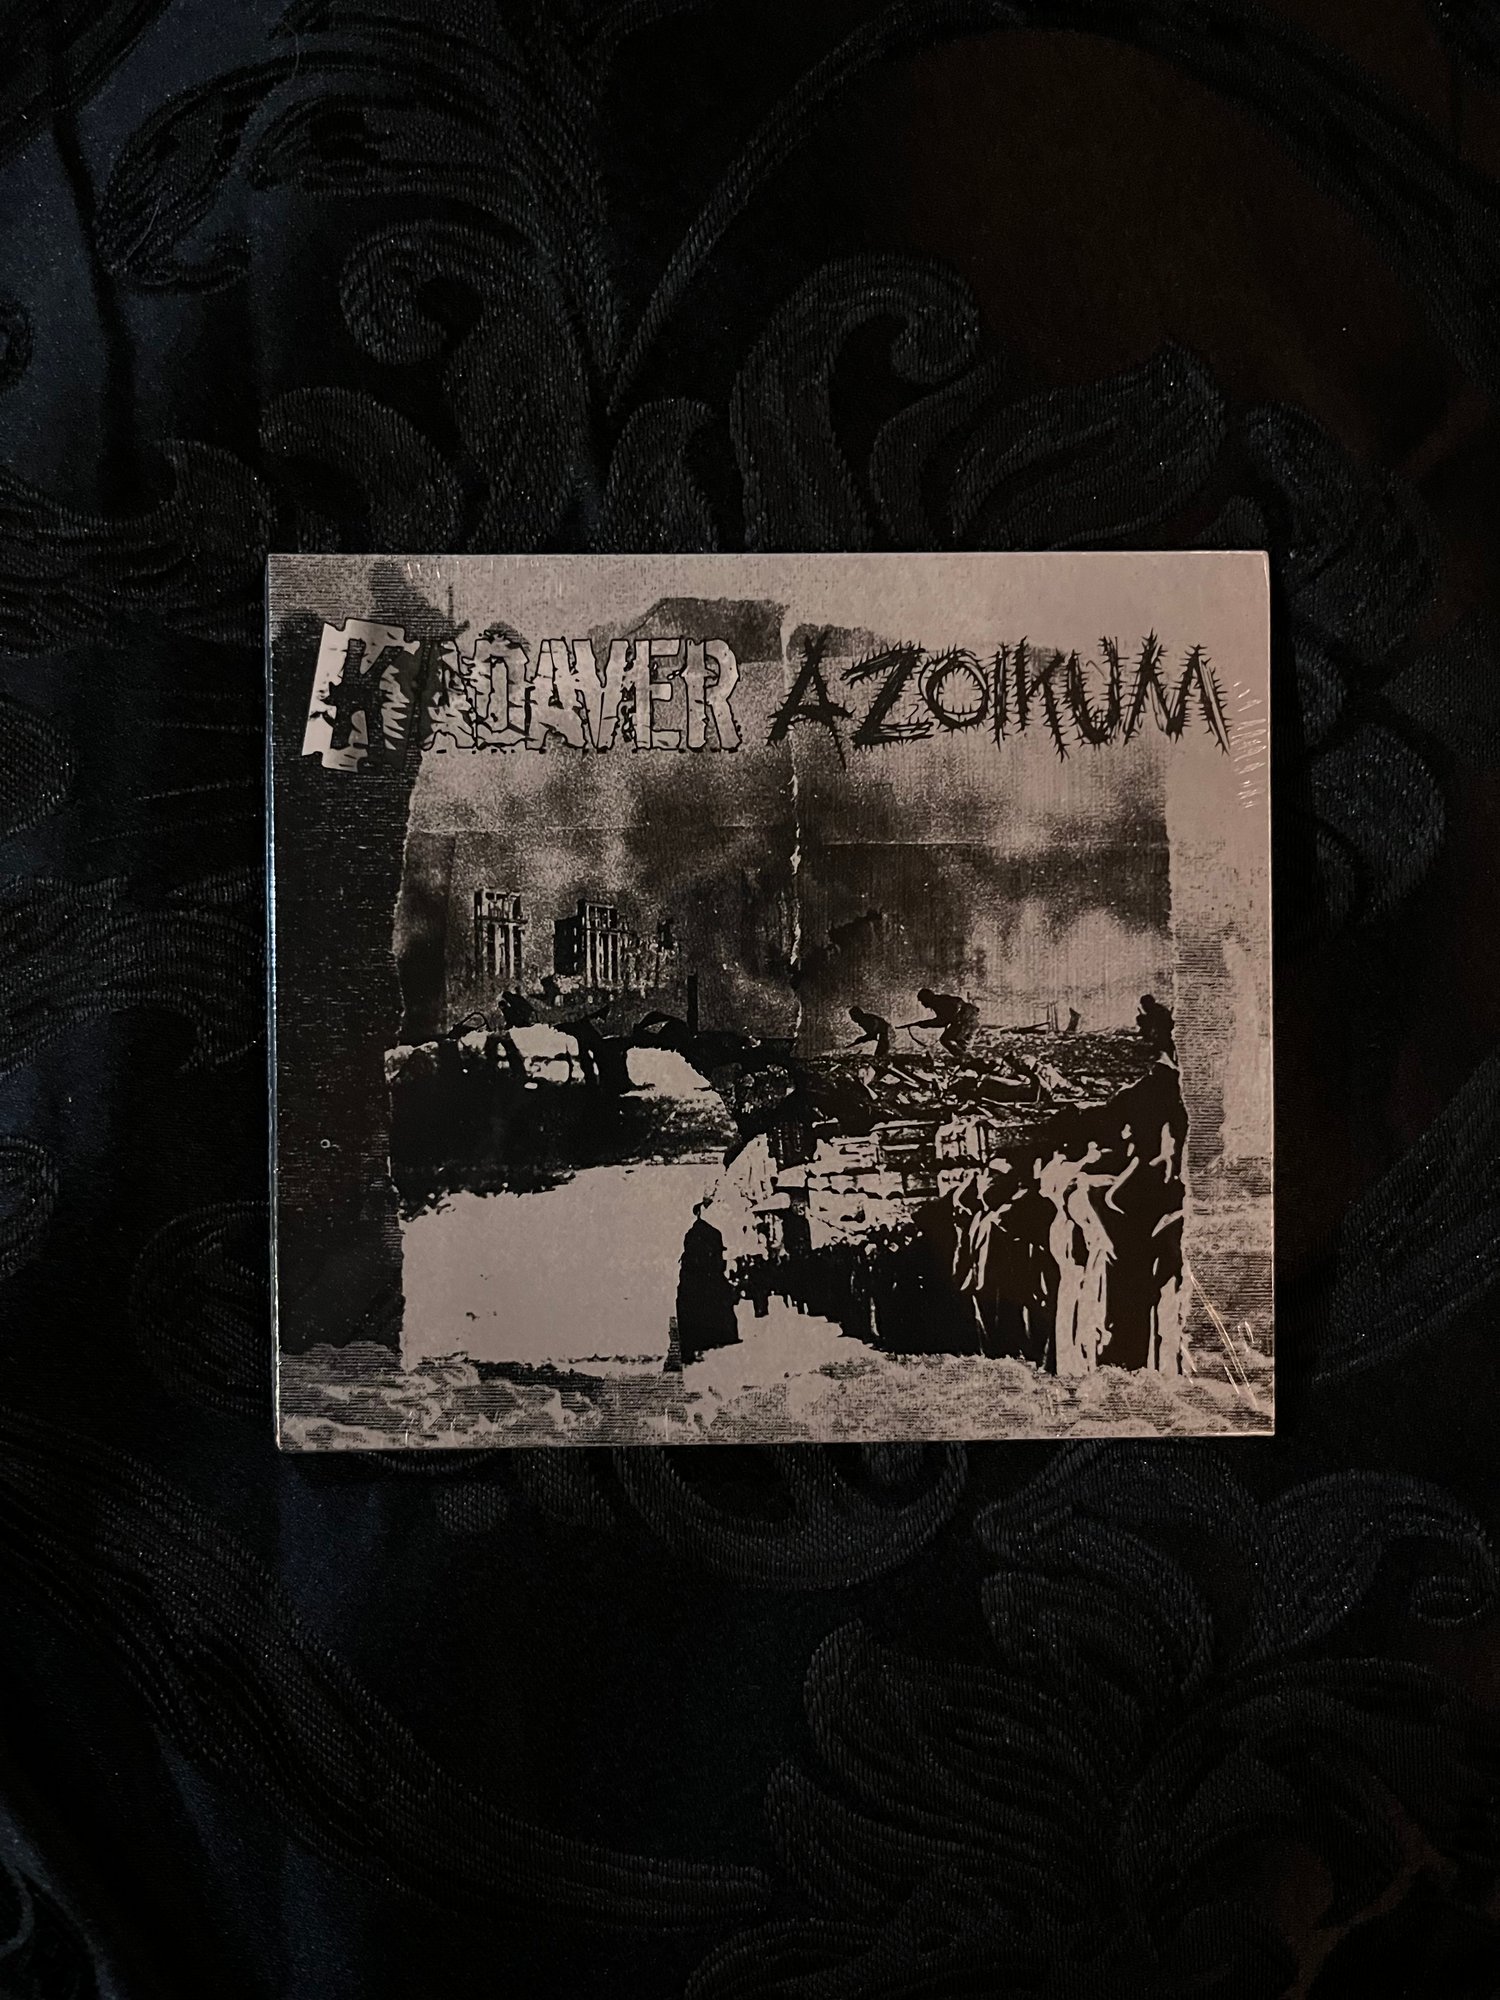 Kadaver / Azoikum - The Pornographic Aspects of Genocide CD (Fusty Cunt)